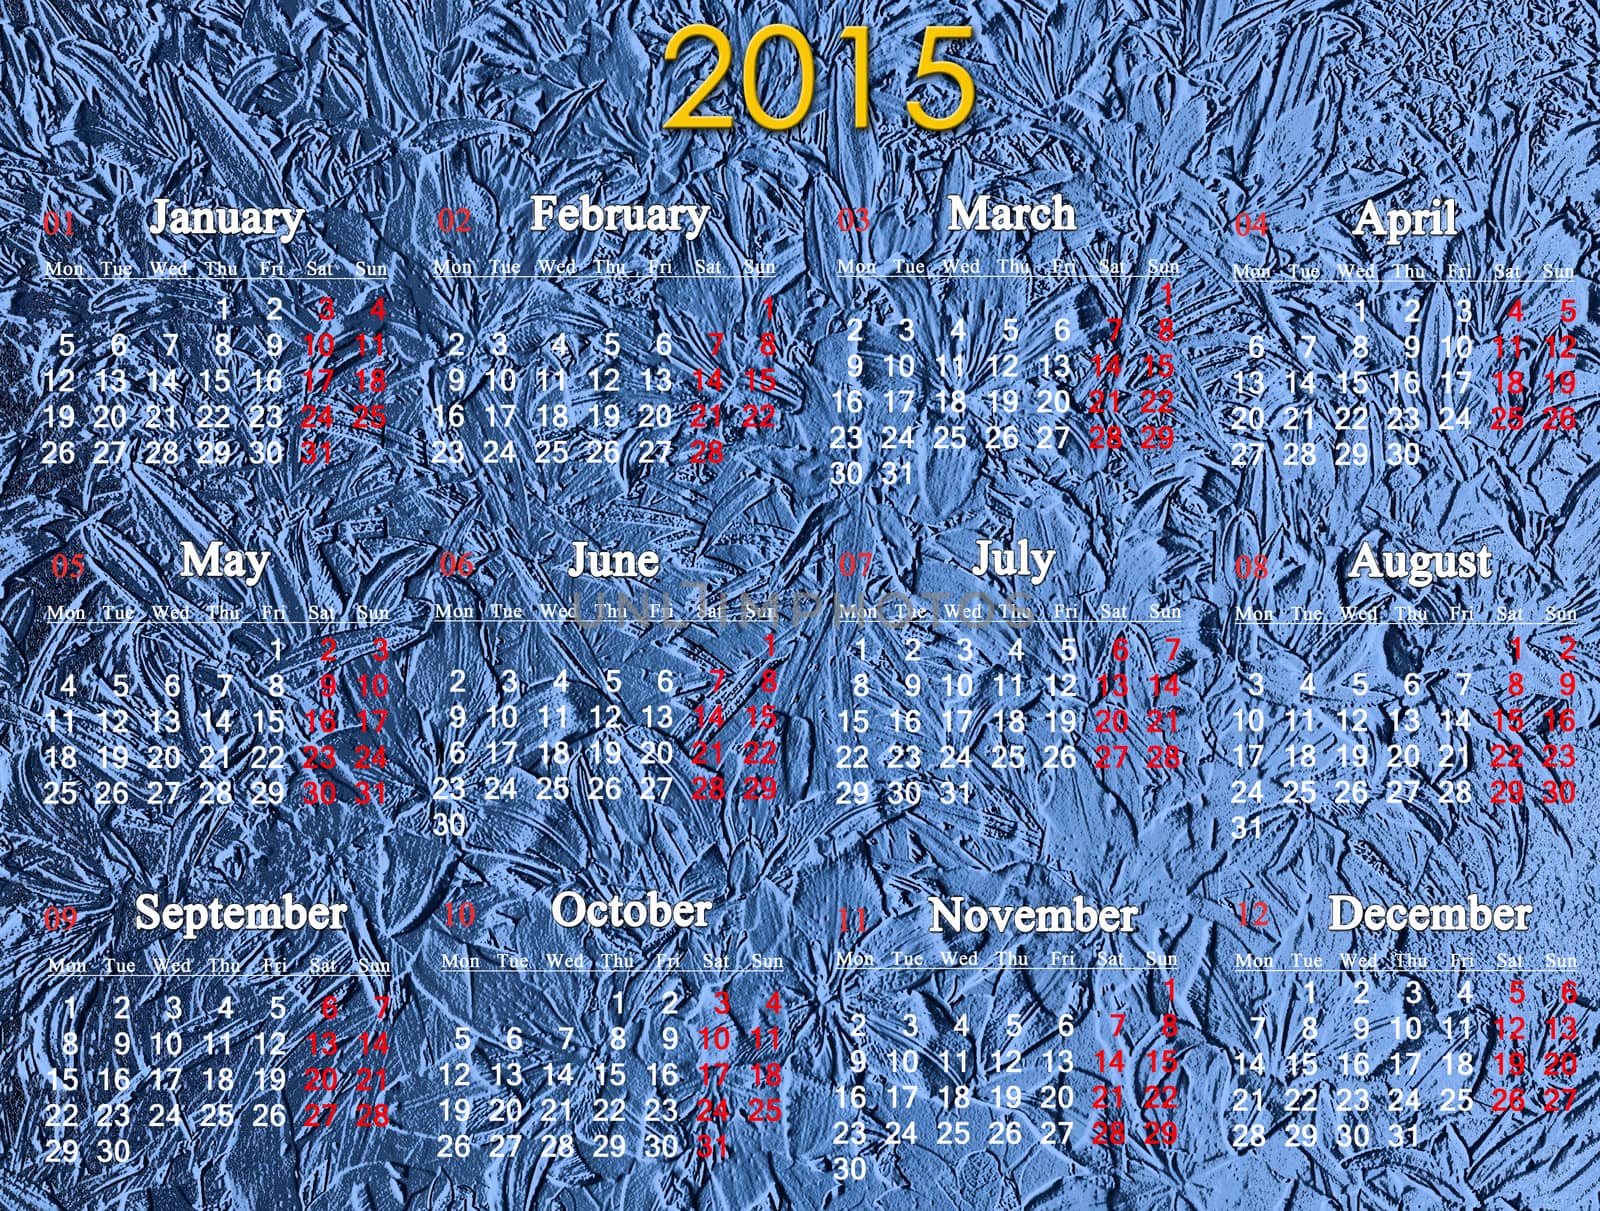 calendar for 2014 year on the luxurious blue background